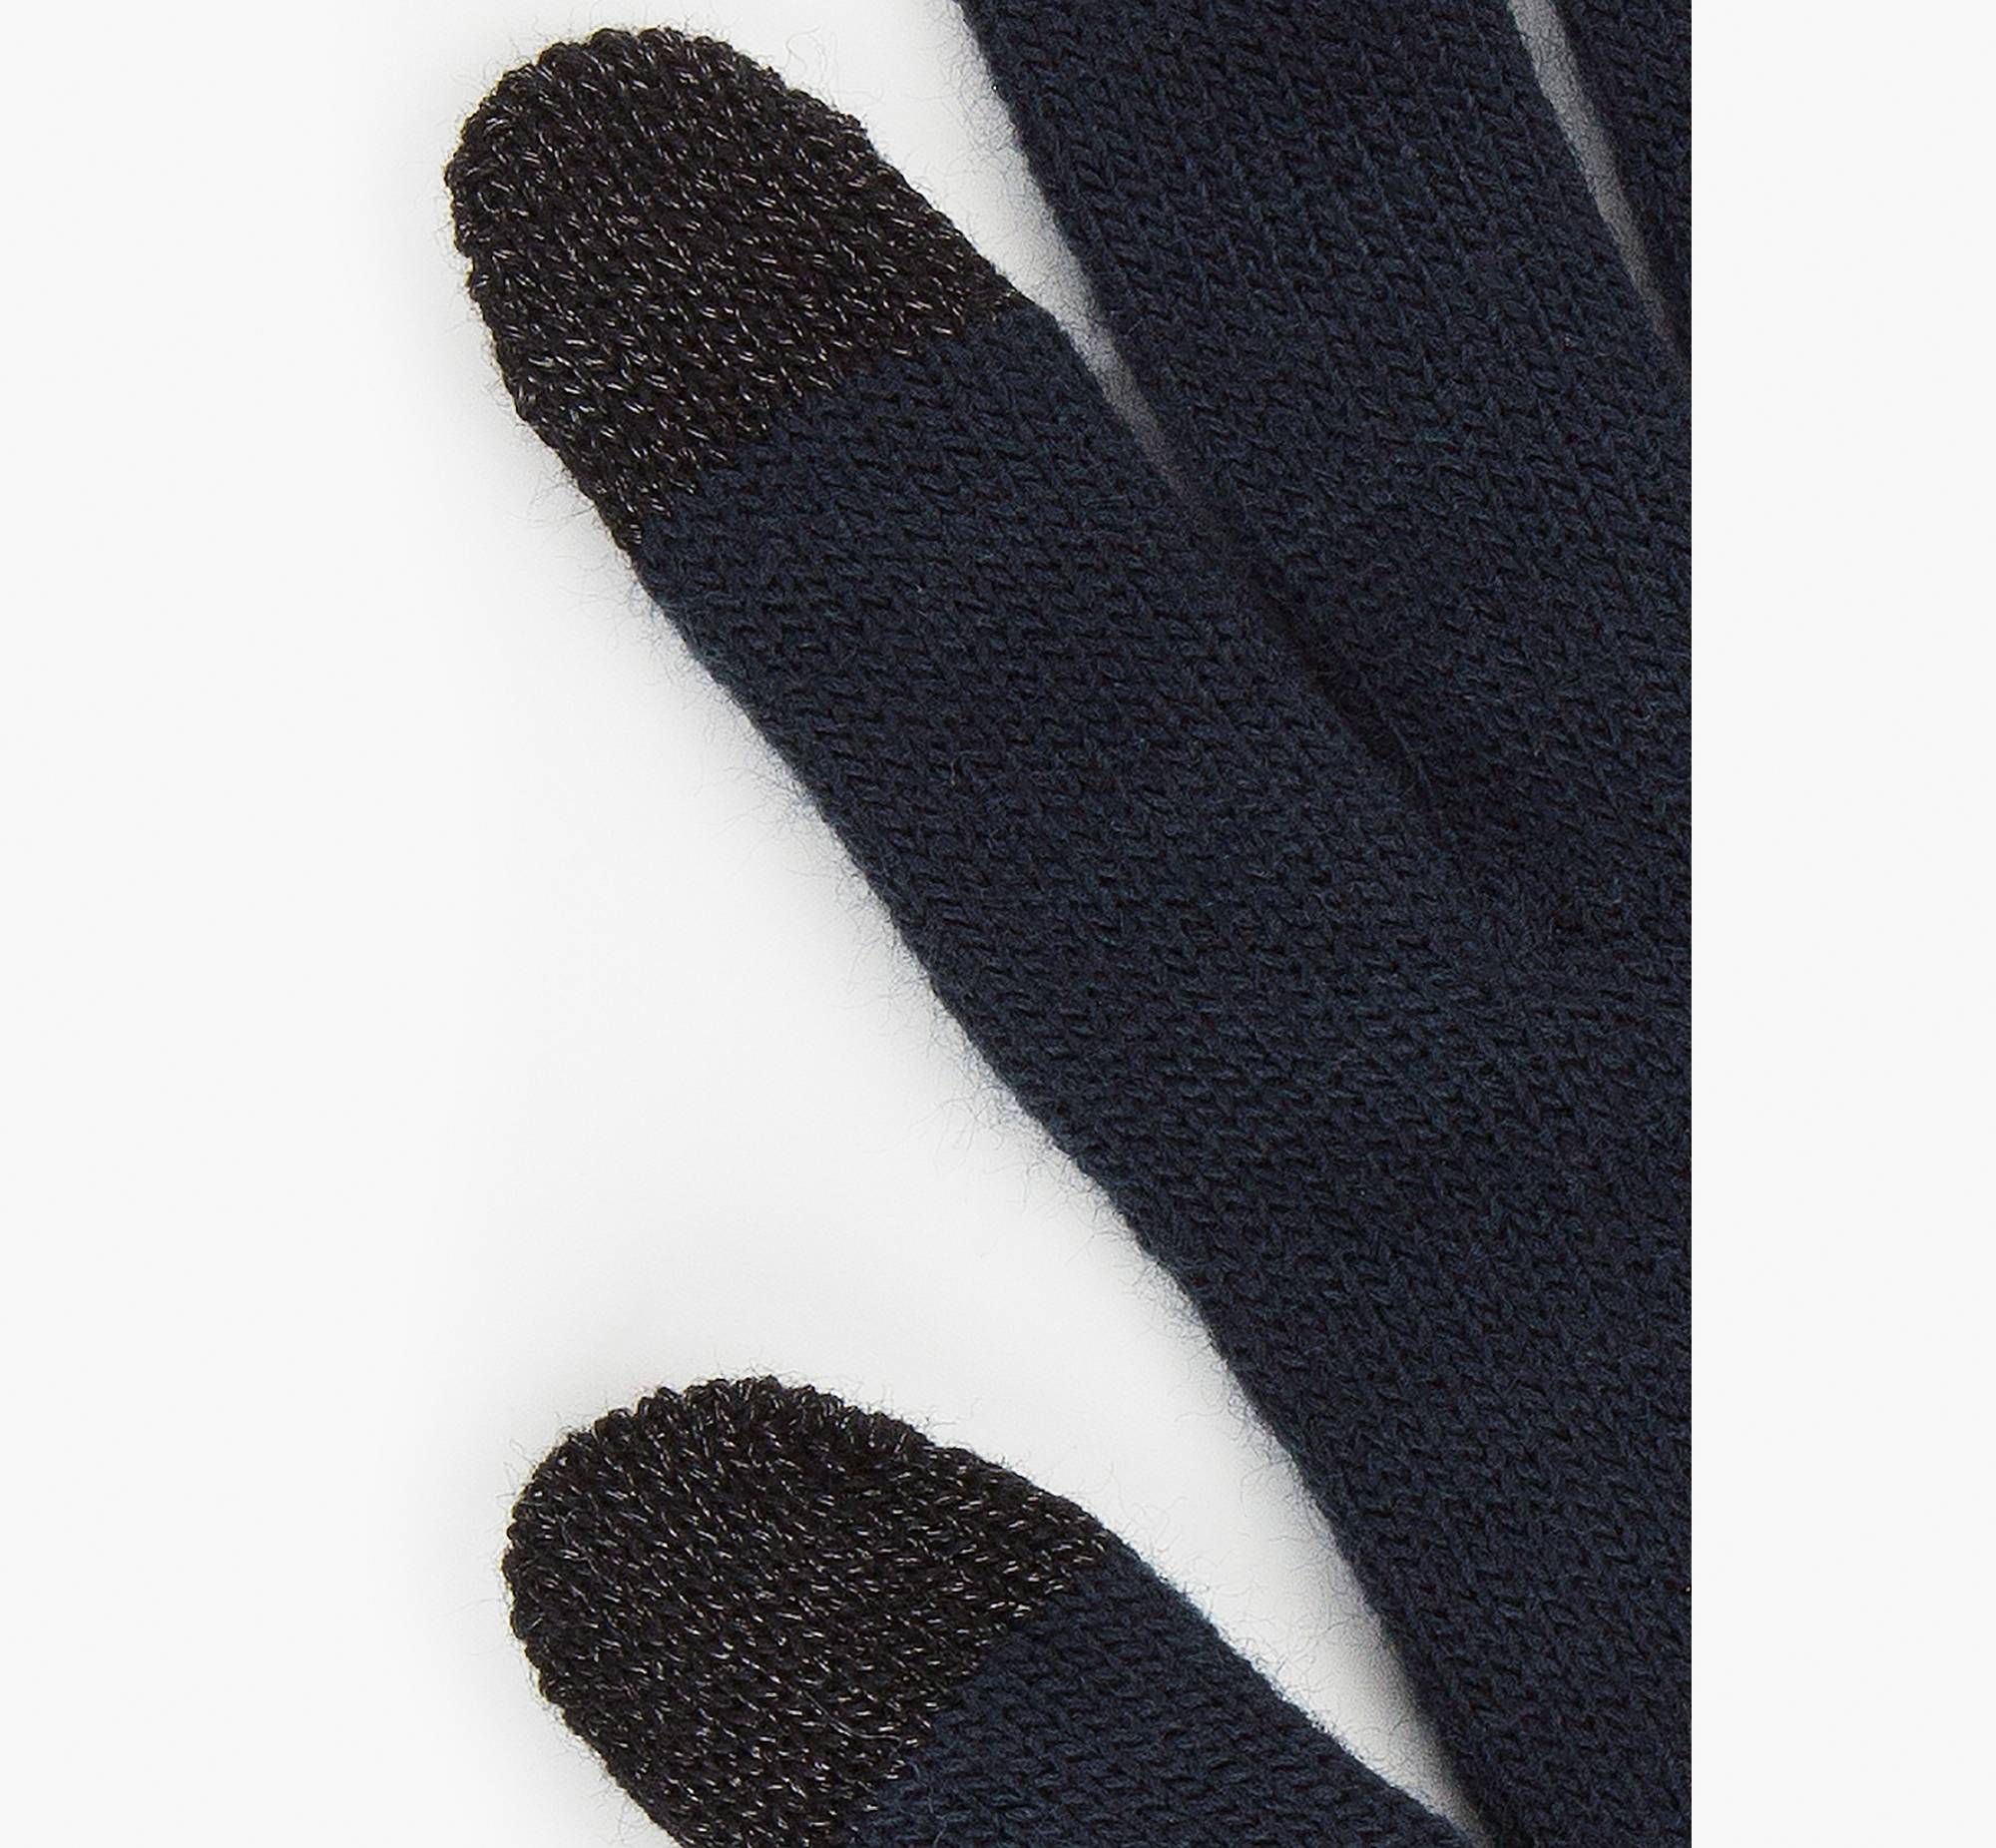 Touch Screen Gloves 2